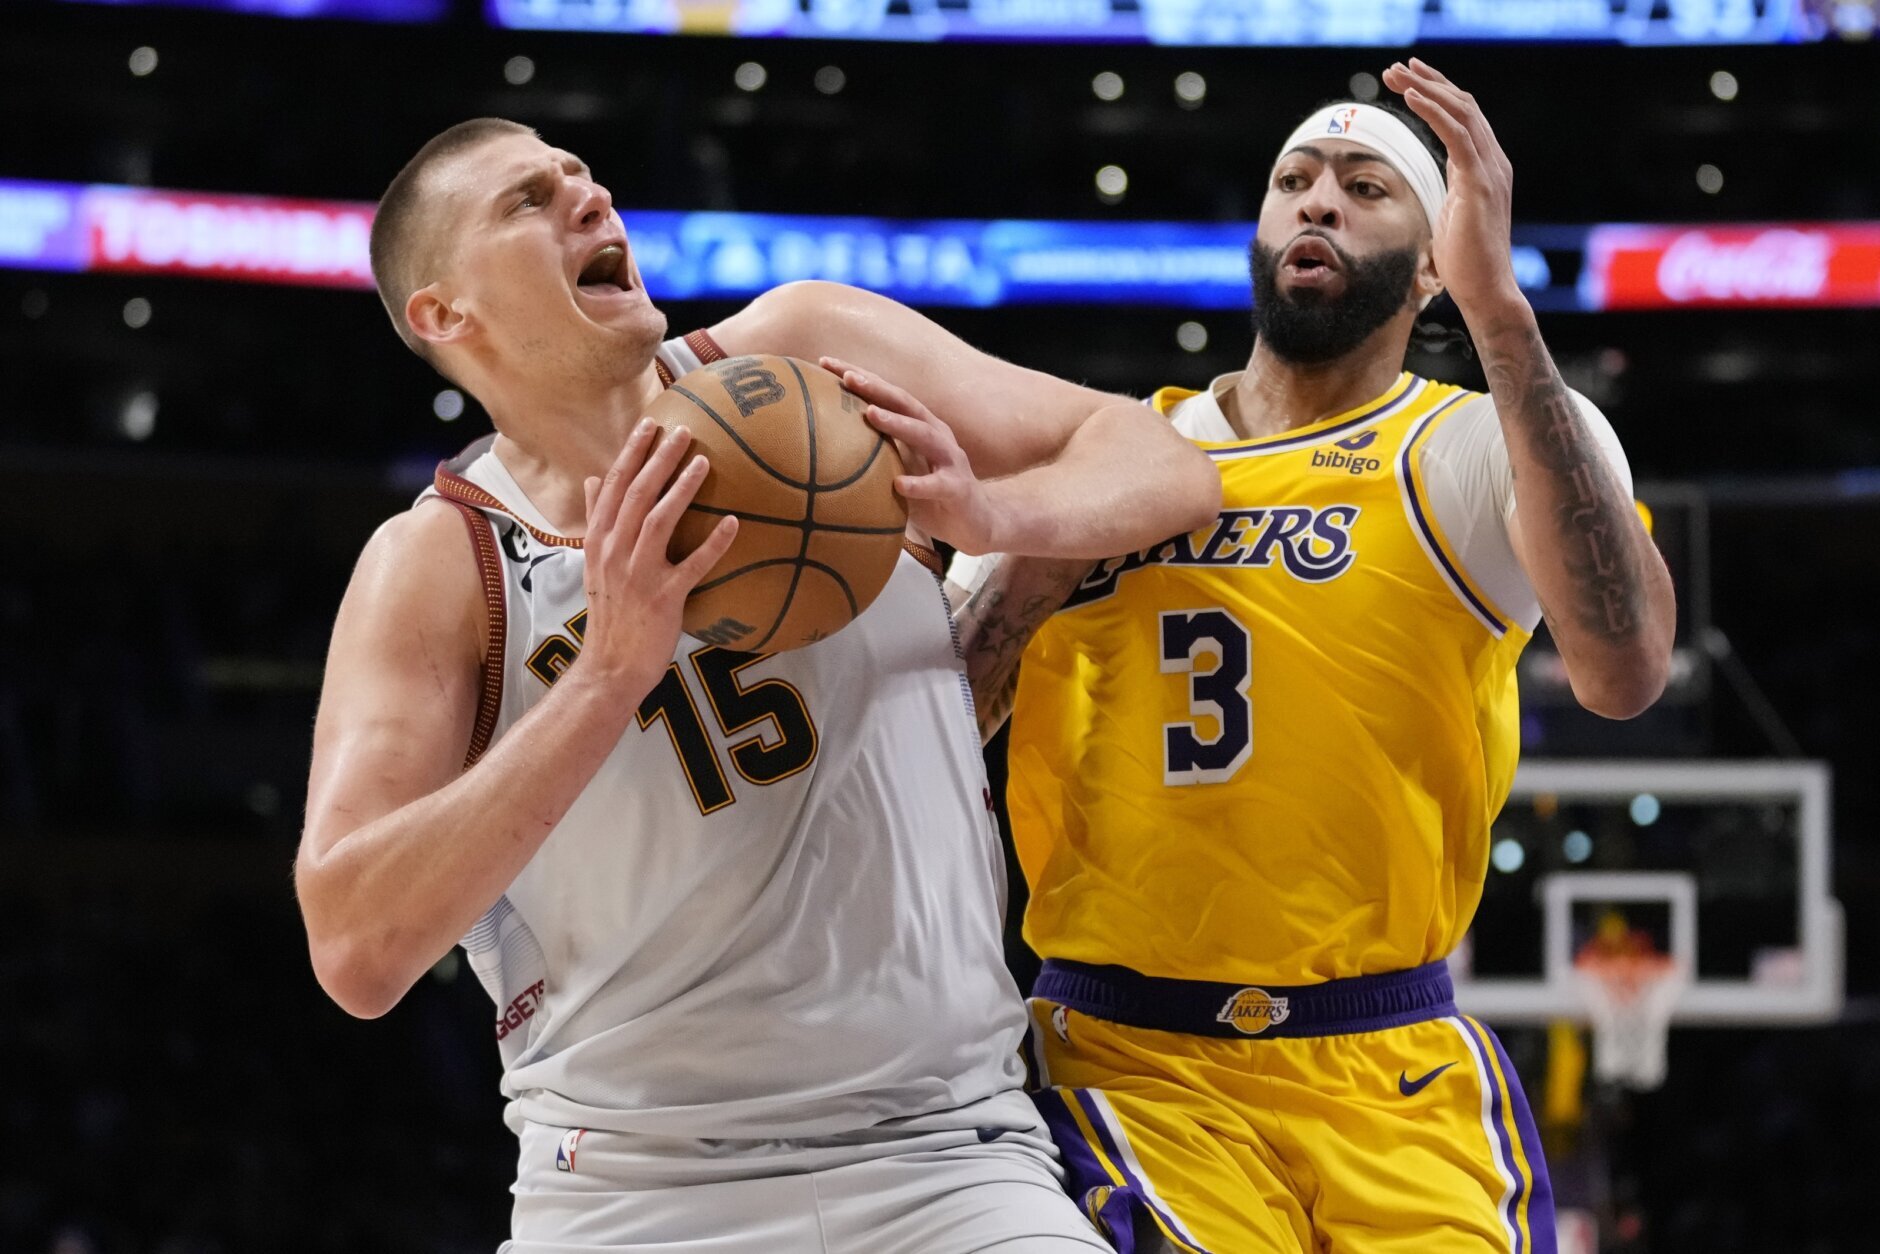 Jokic leads Denver Nuggets past LeBron's Lakers 113-111, into their first NBA Finals - WTOP News